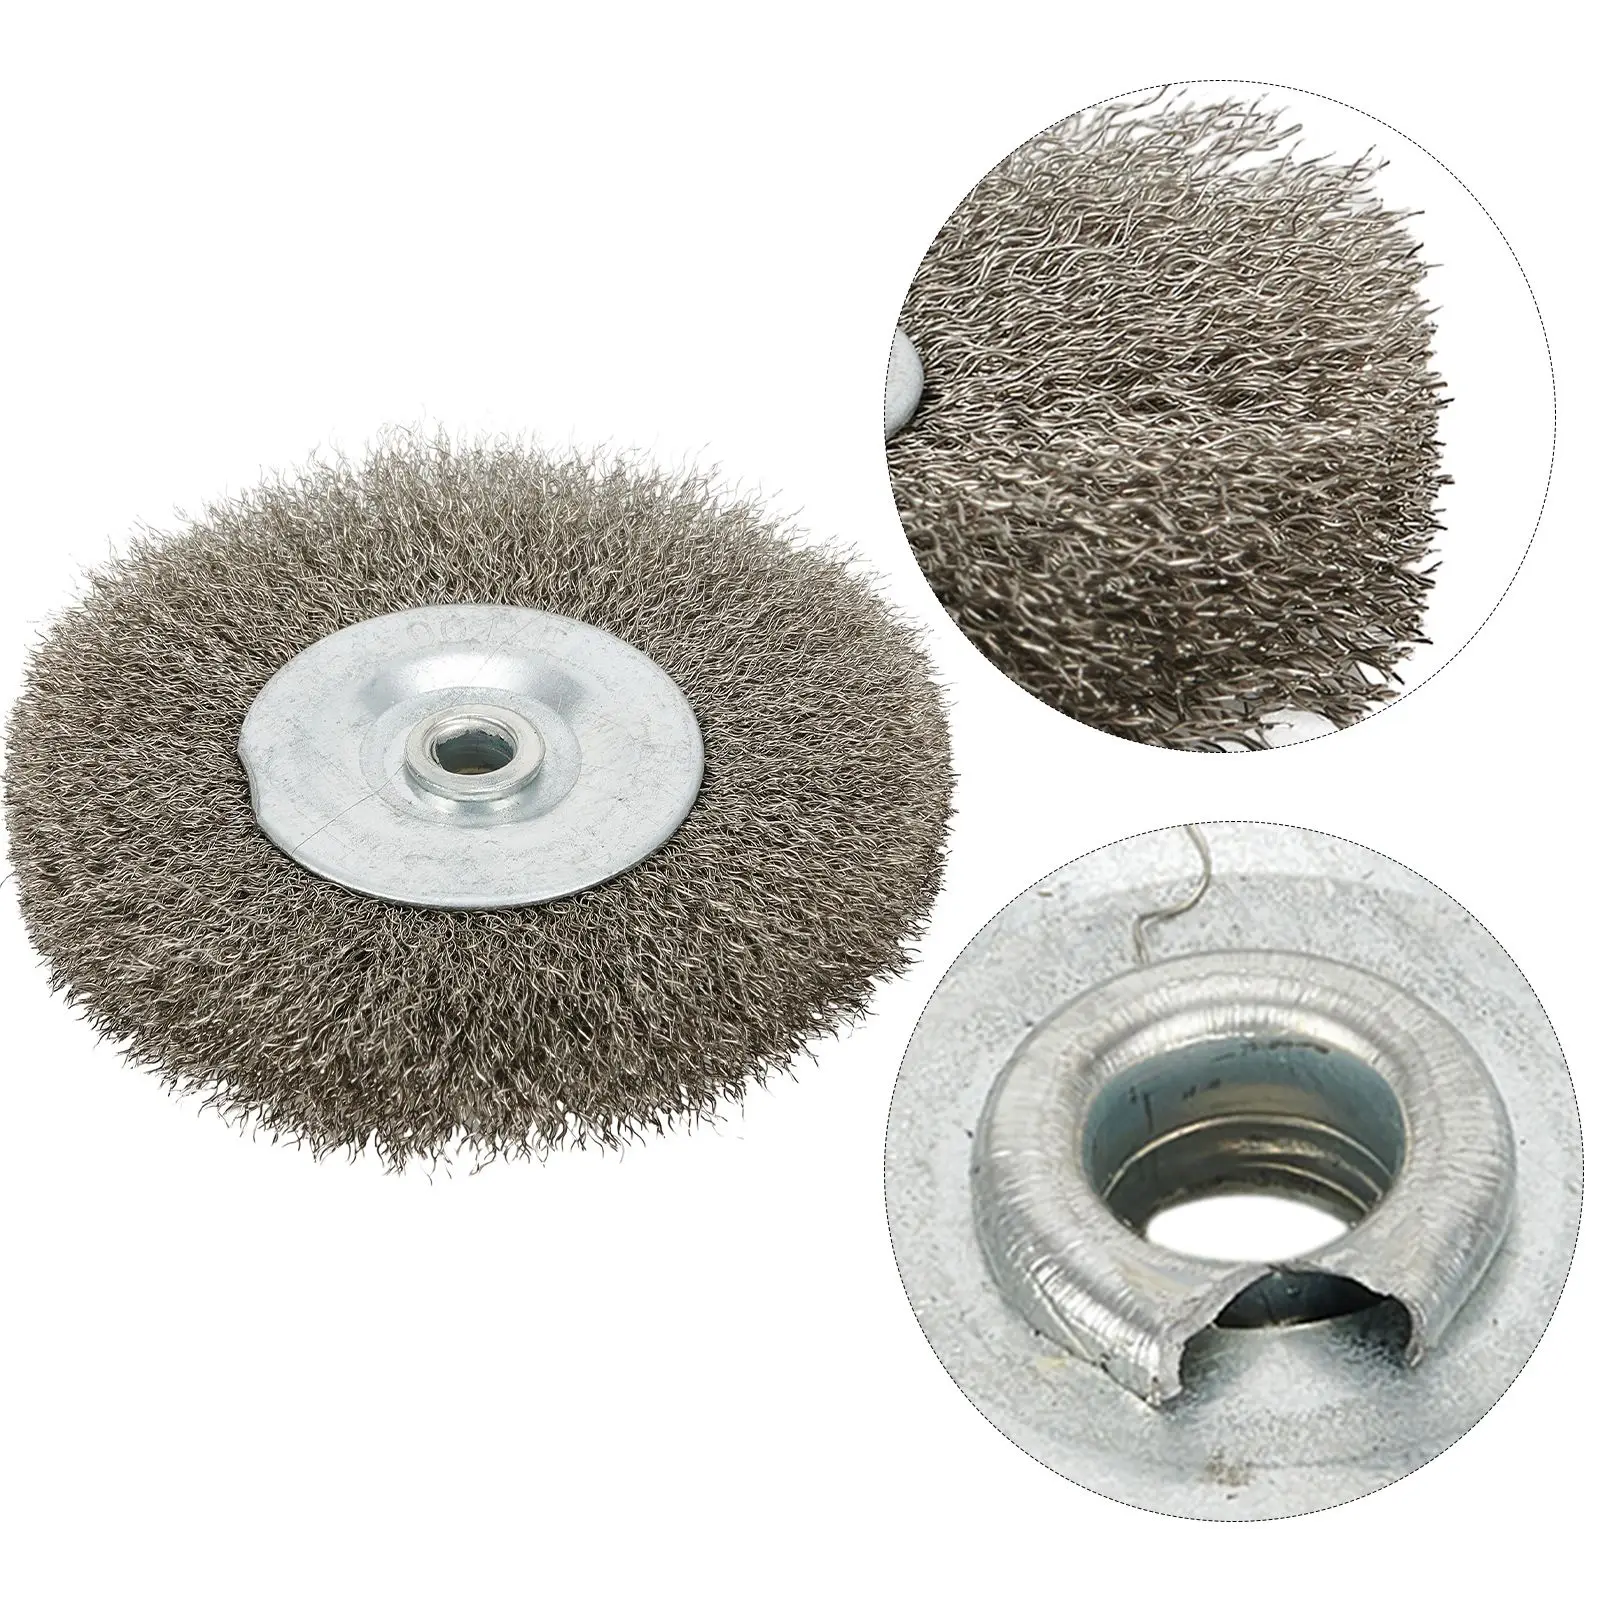 Flat Crimped Wire Wheel Brush For Angle Grinder 0.52in Bore Stainless Steel 3inch Outer Diamter 13mm Internal Diamter Power Tool flat crimped wire wheel brush for angle grinder 0 52in bore stainless steel 3inch outer diamter 13mm internal diamter power tool